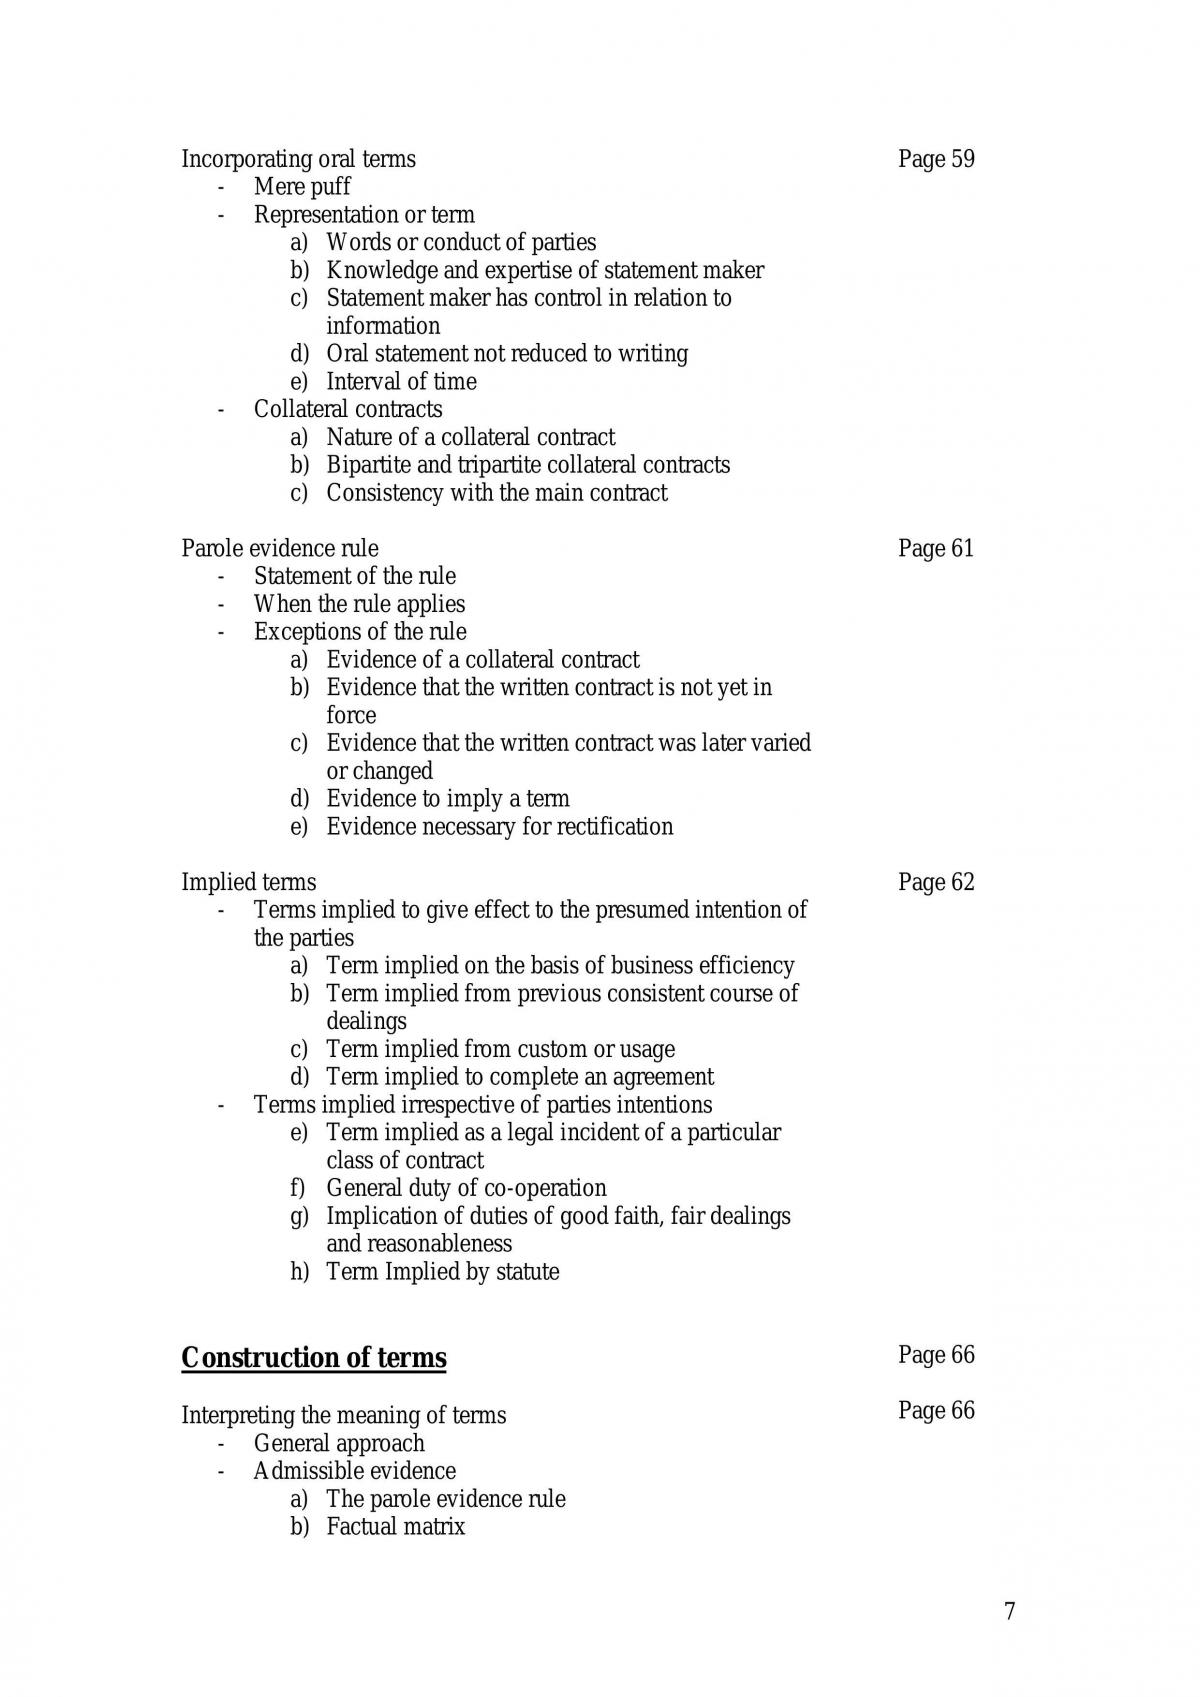 Complete Contracts Study Notes - Page 7